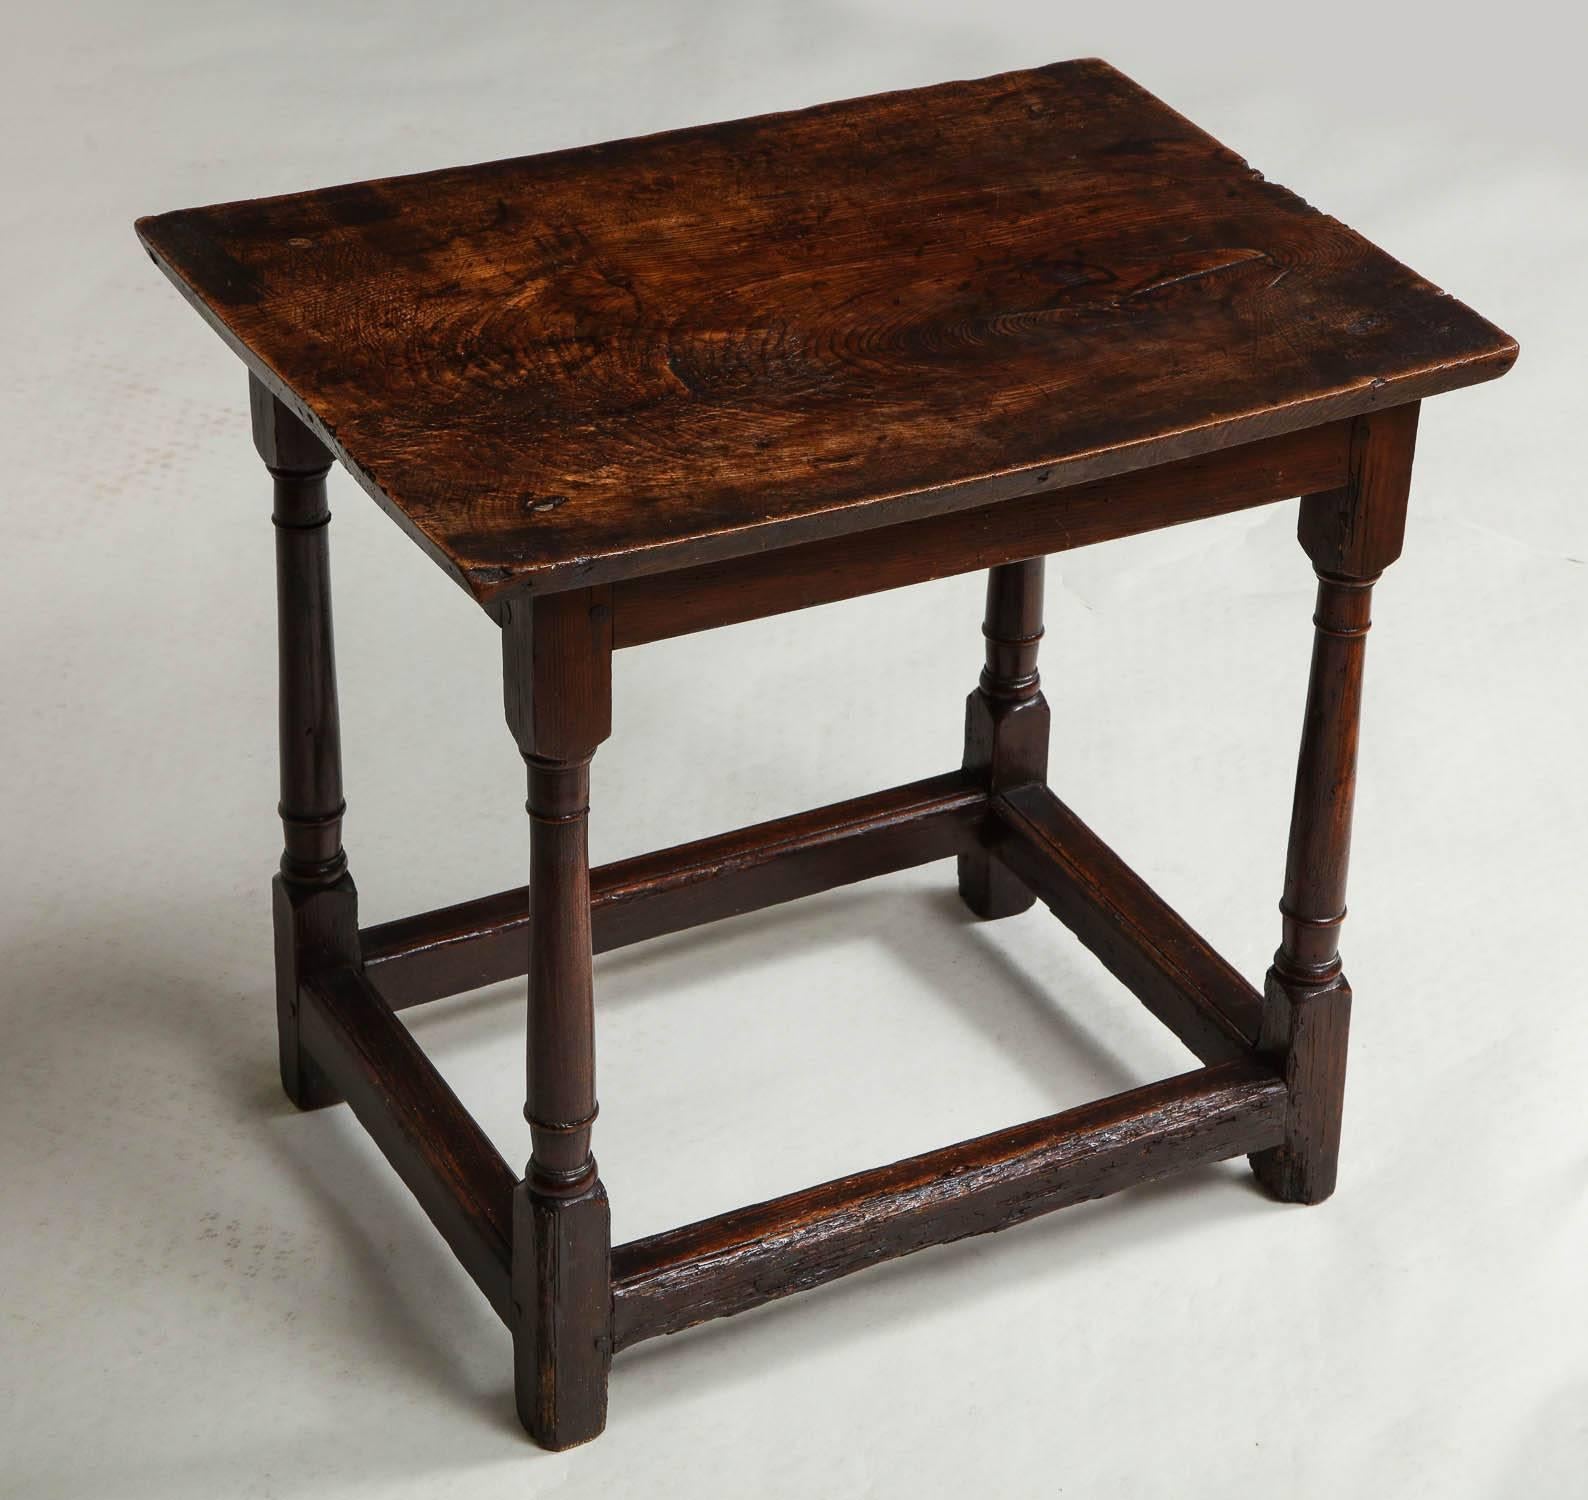 Fine English late 17th-early 18th century low table, the single ash plank top with vivid graining and having slightly undercut chamfered edge, over balustrade turned legs joined by box stretchers, the whole with exceptional color and patination to